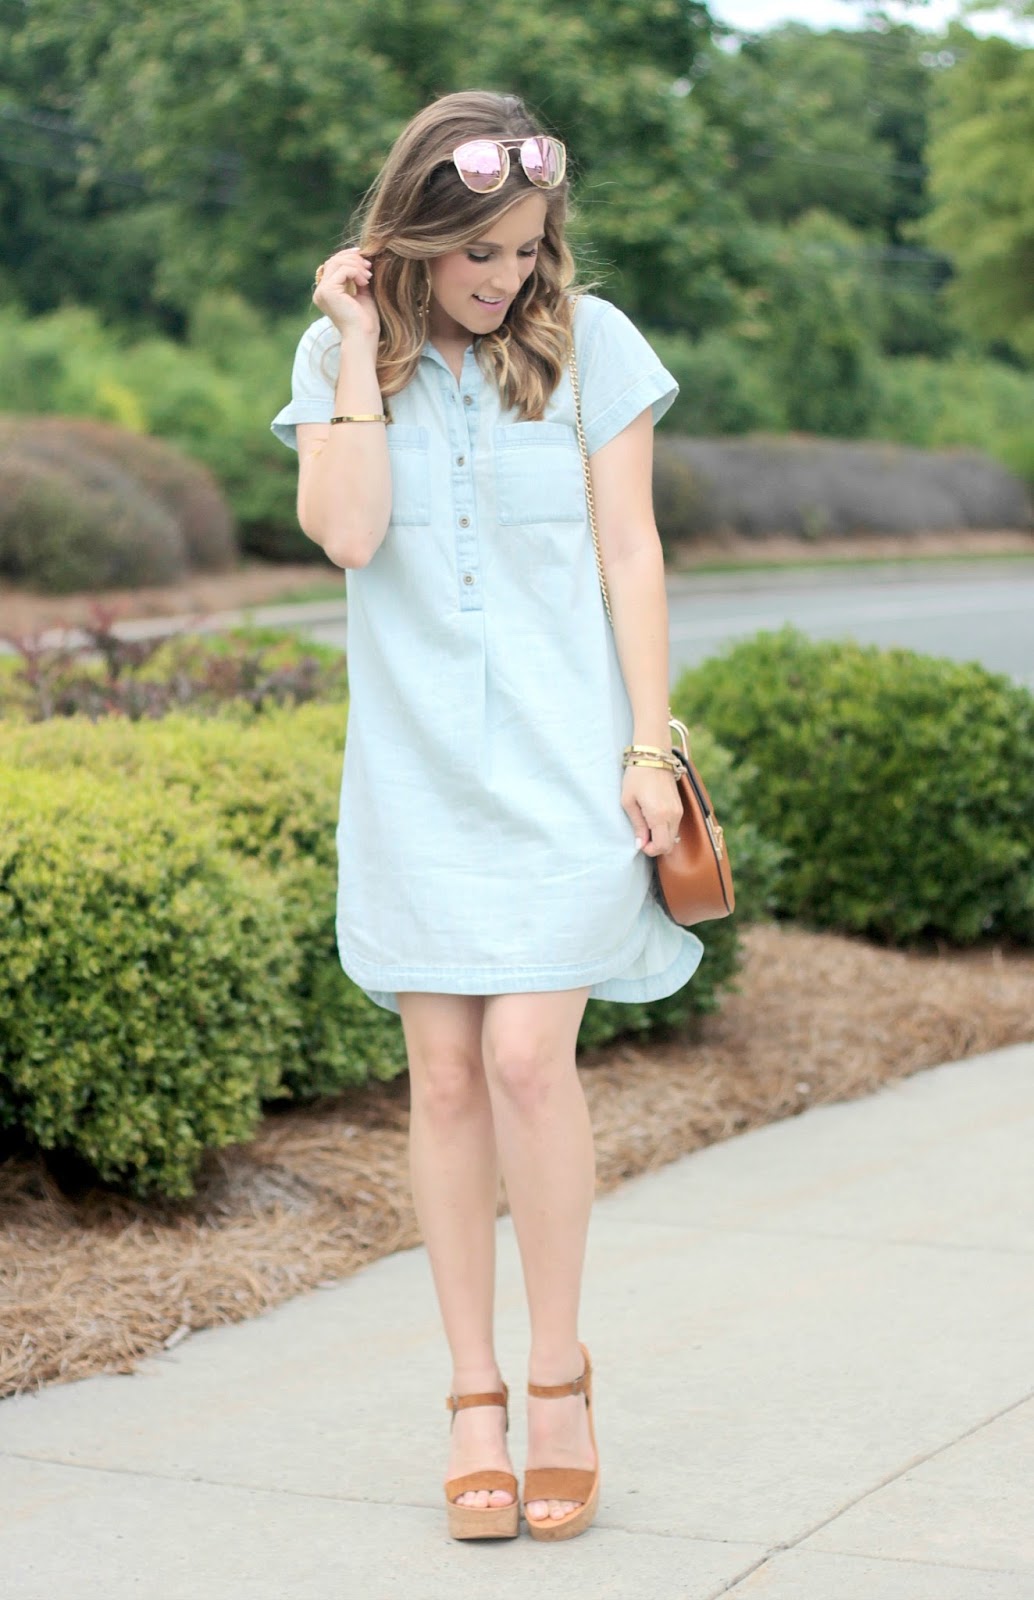 An Easy Way To Dress Up A Simple Shirt Dress | The Dainty Darling